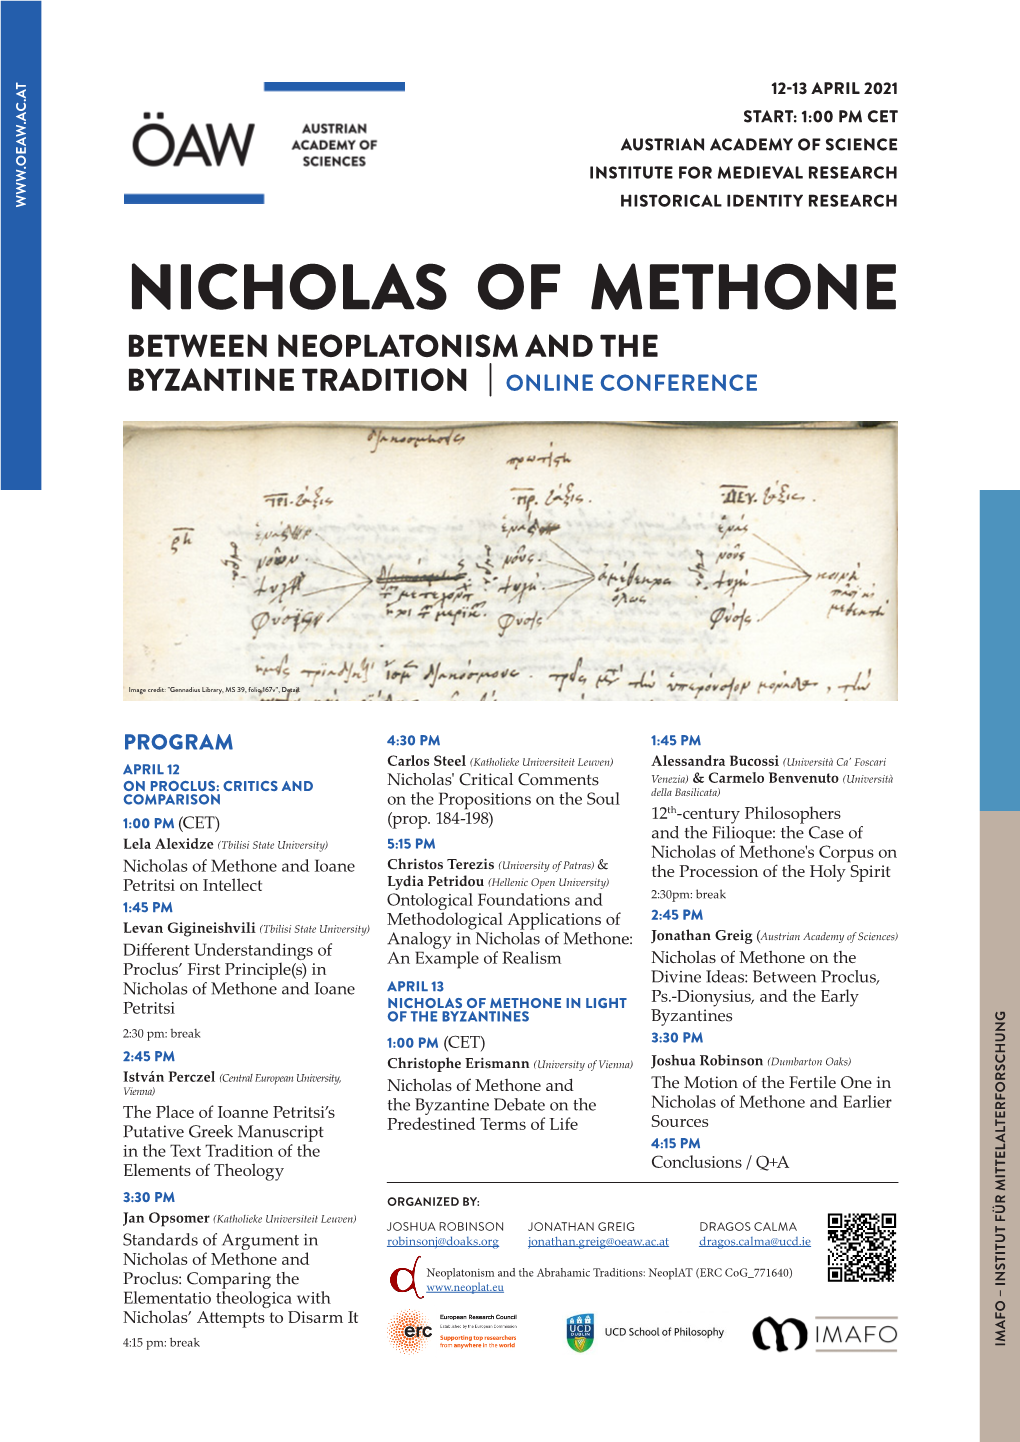 Nicholas of Methone Between Neoplatonism and the Byzantine Tradition | Online Conference